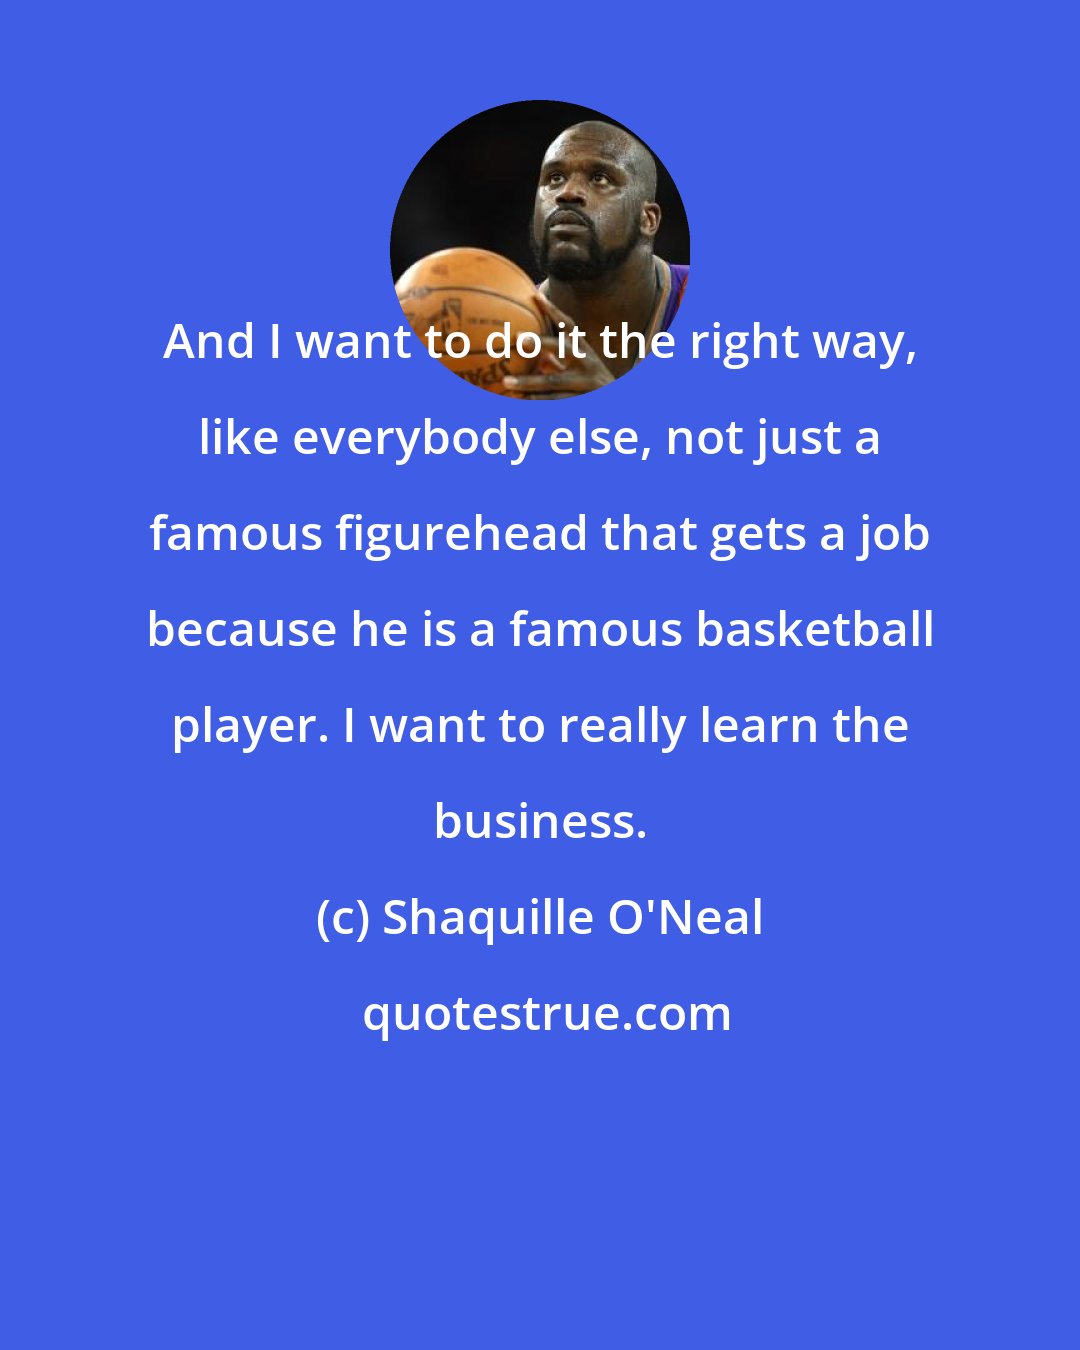 Shaquille O'Neal: And I want to do it the right way, like everybody else, not just a famous figurehead that gets a job because he is a famous basketball player. I want to really learn the business.